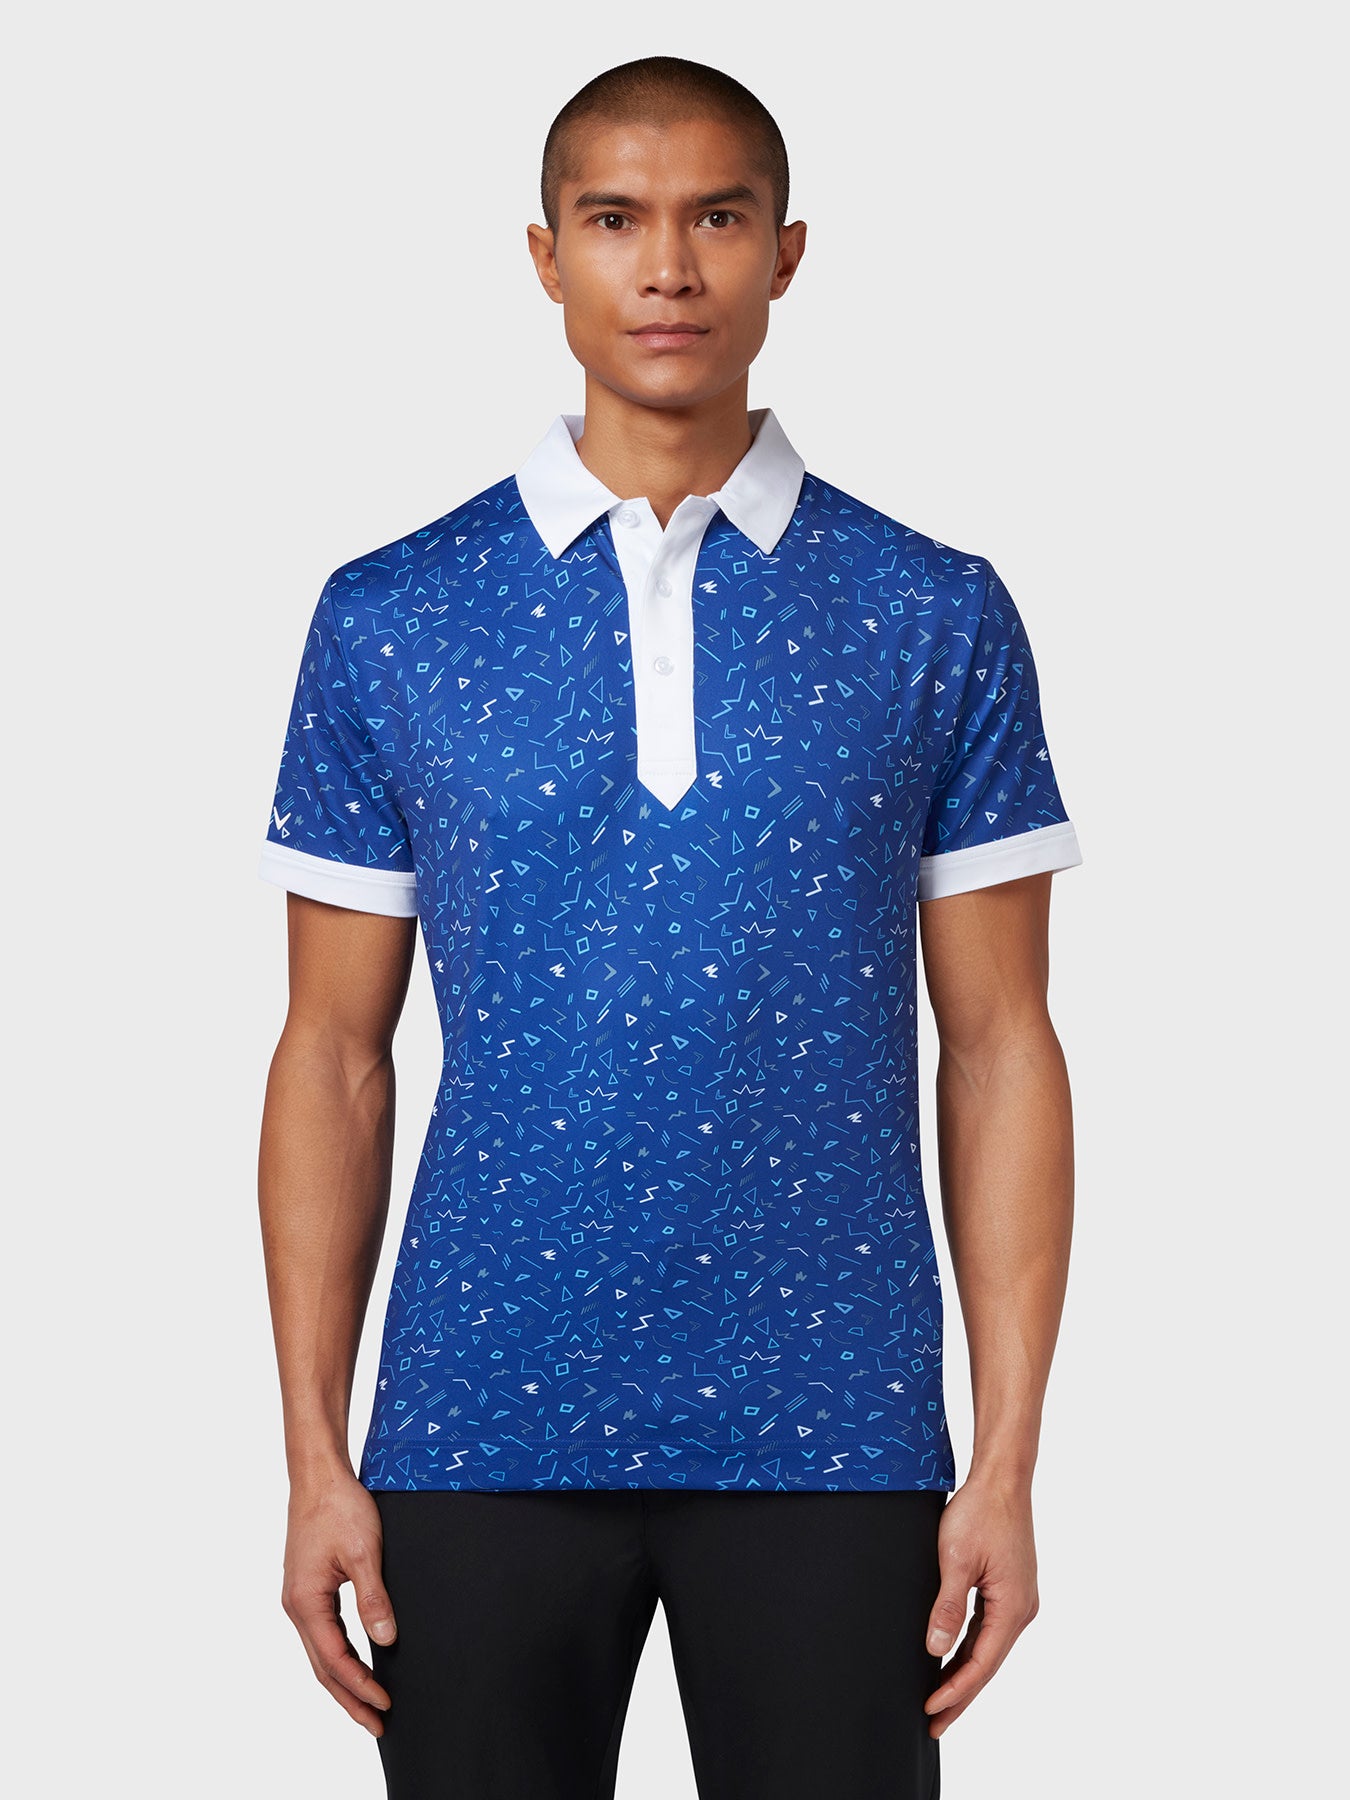 View X Series Chev Memphis All Over Print Polo In Clematis Blue Clematis Blue L information